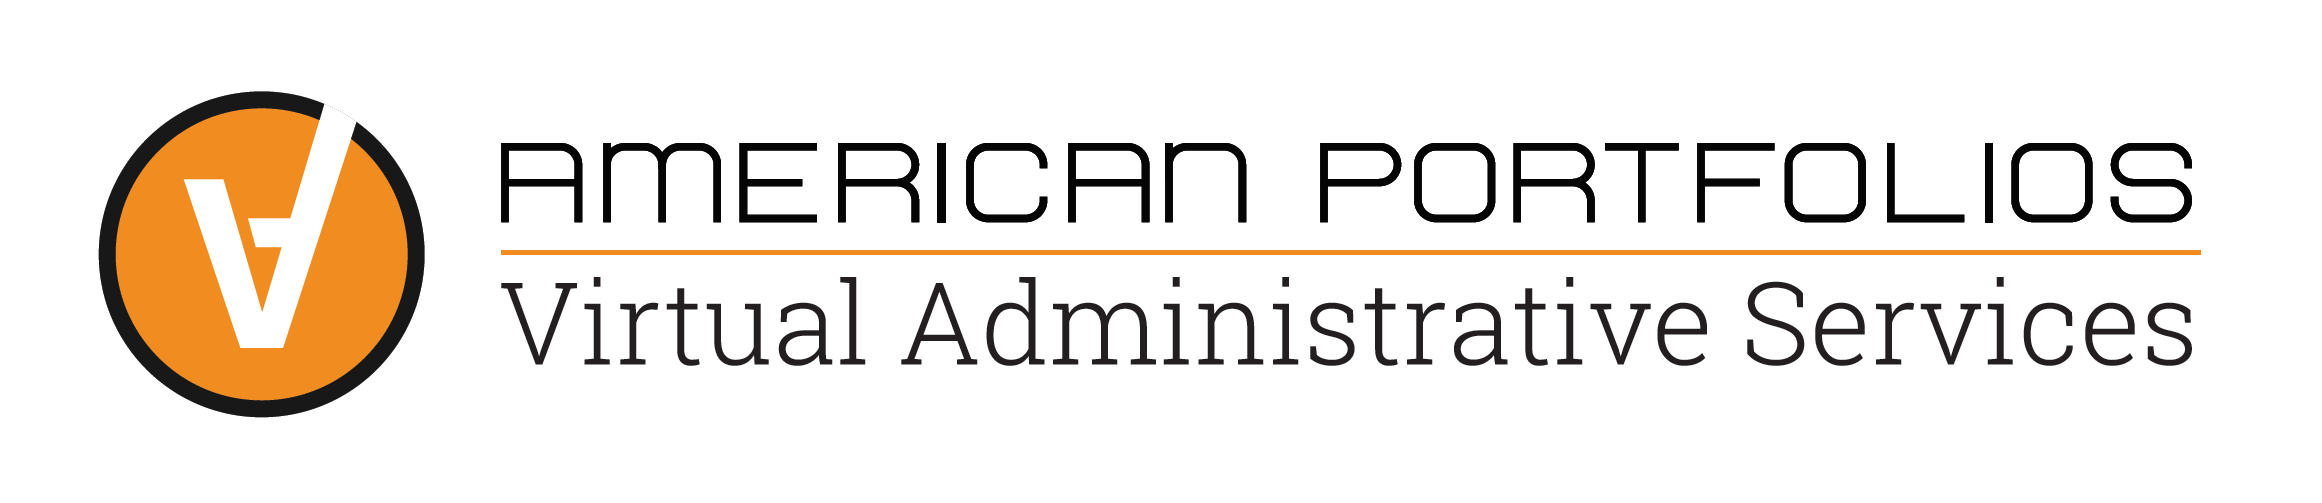 American Portfolios Financial Services, Inc., Wednesday, July 15, 2020, Press release picture